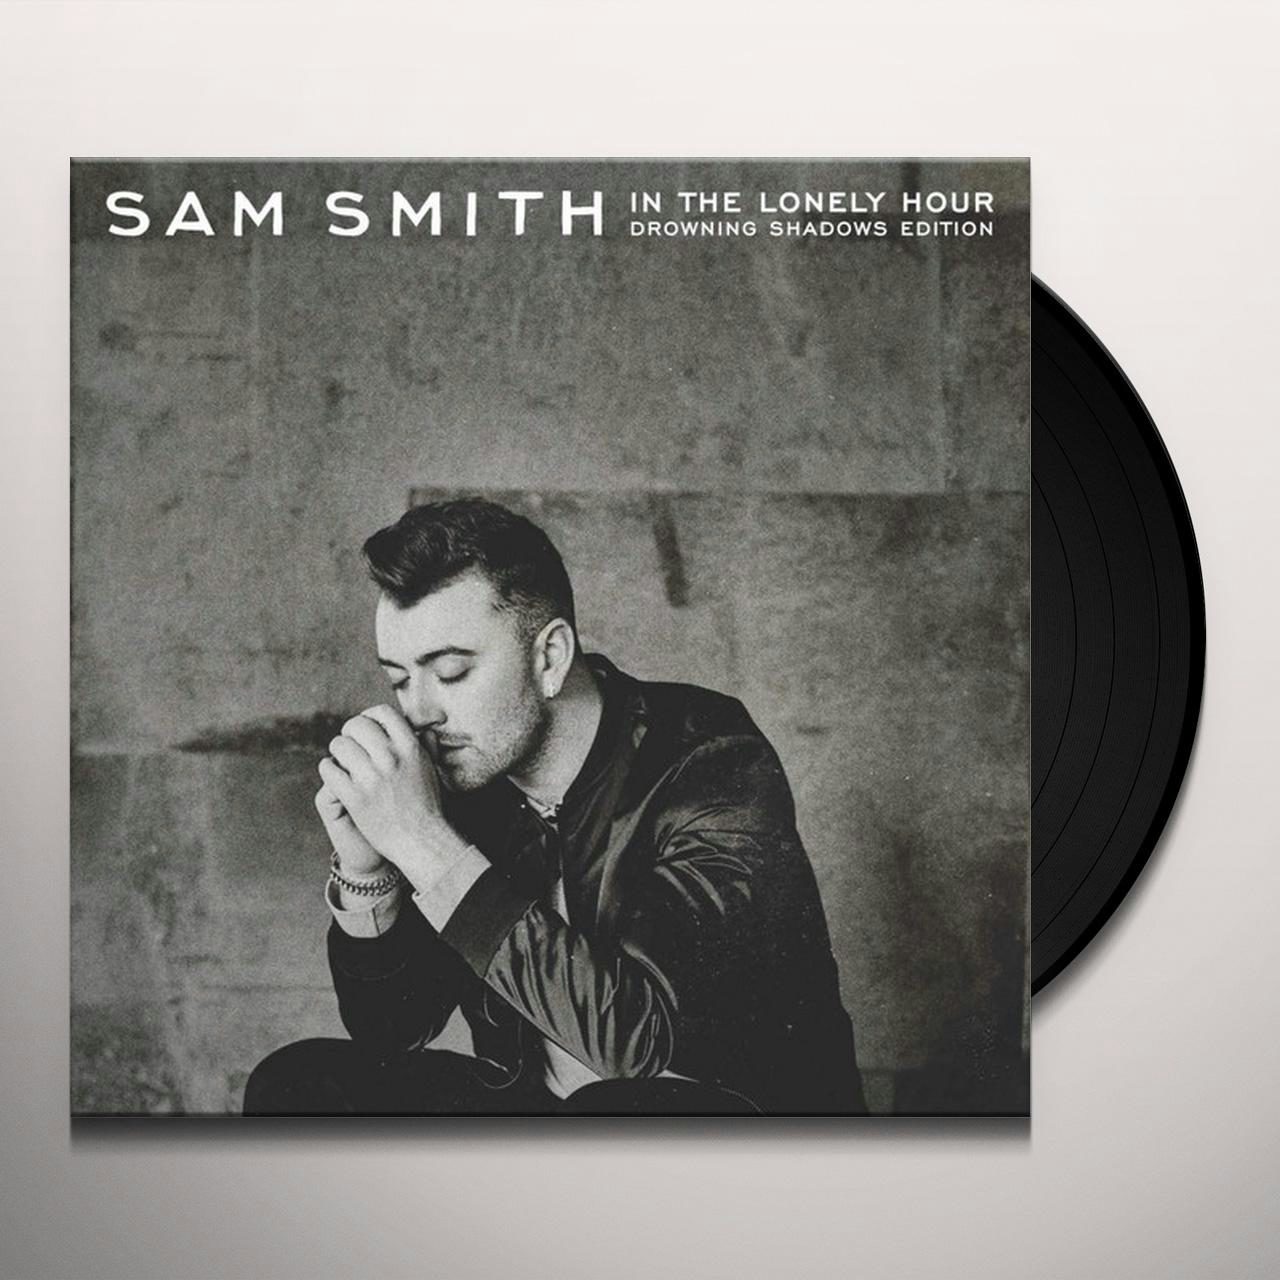 sam smith in the lonely hour album m4a